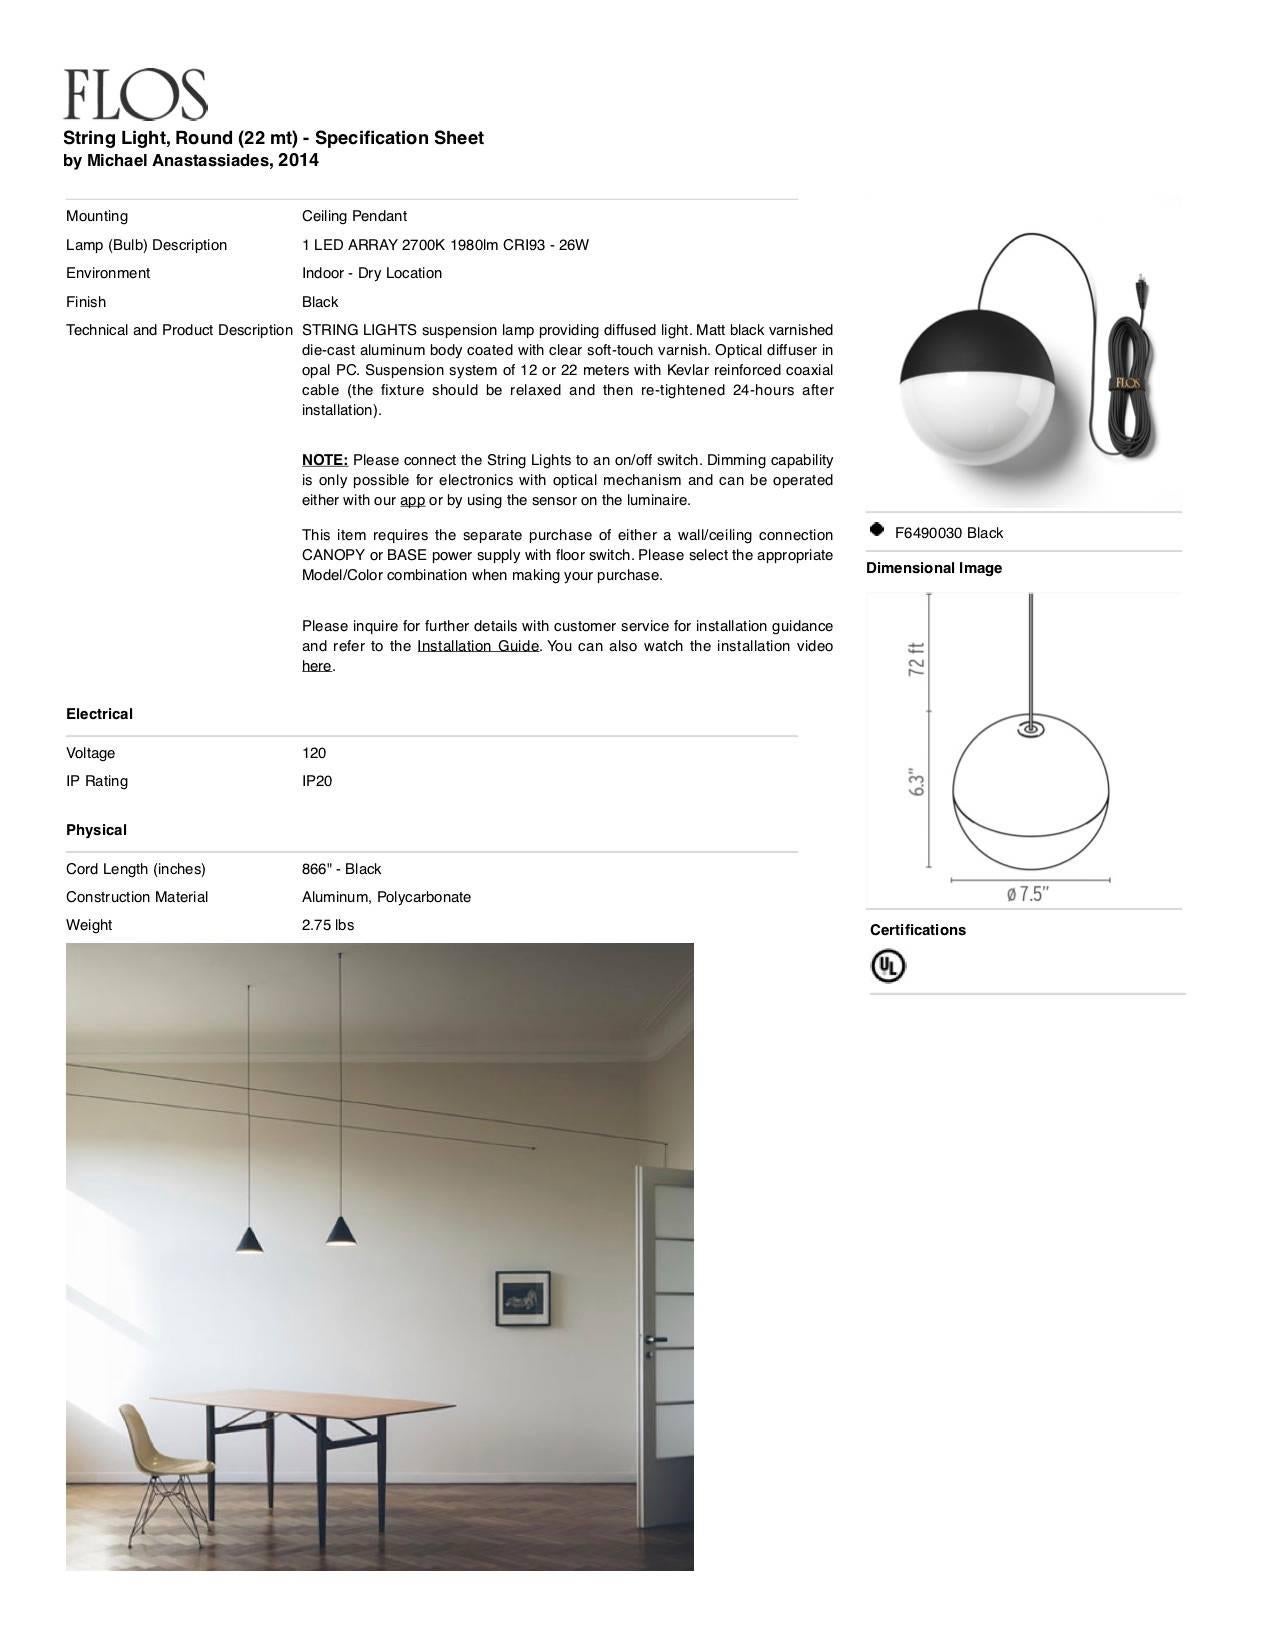 Contemporary Flos Round String Light with Canopy by Michael Anastassiades